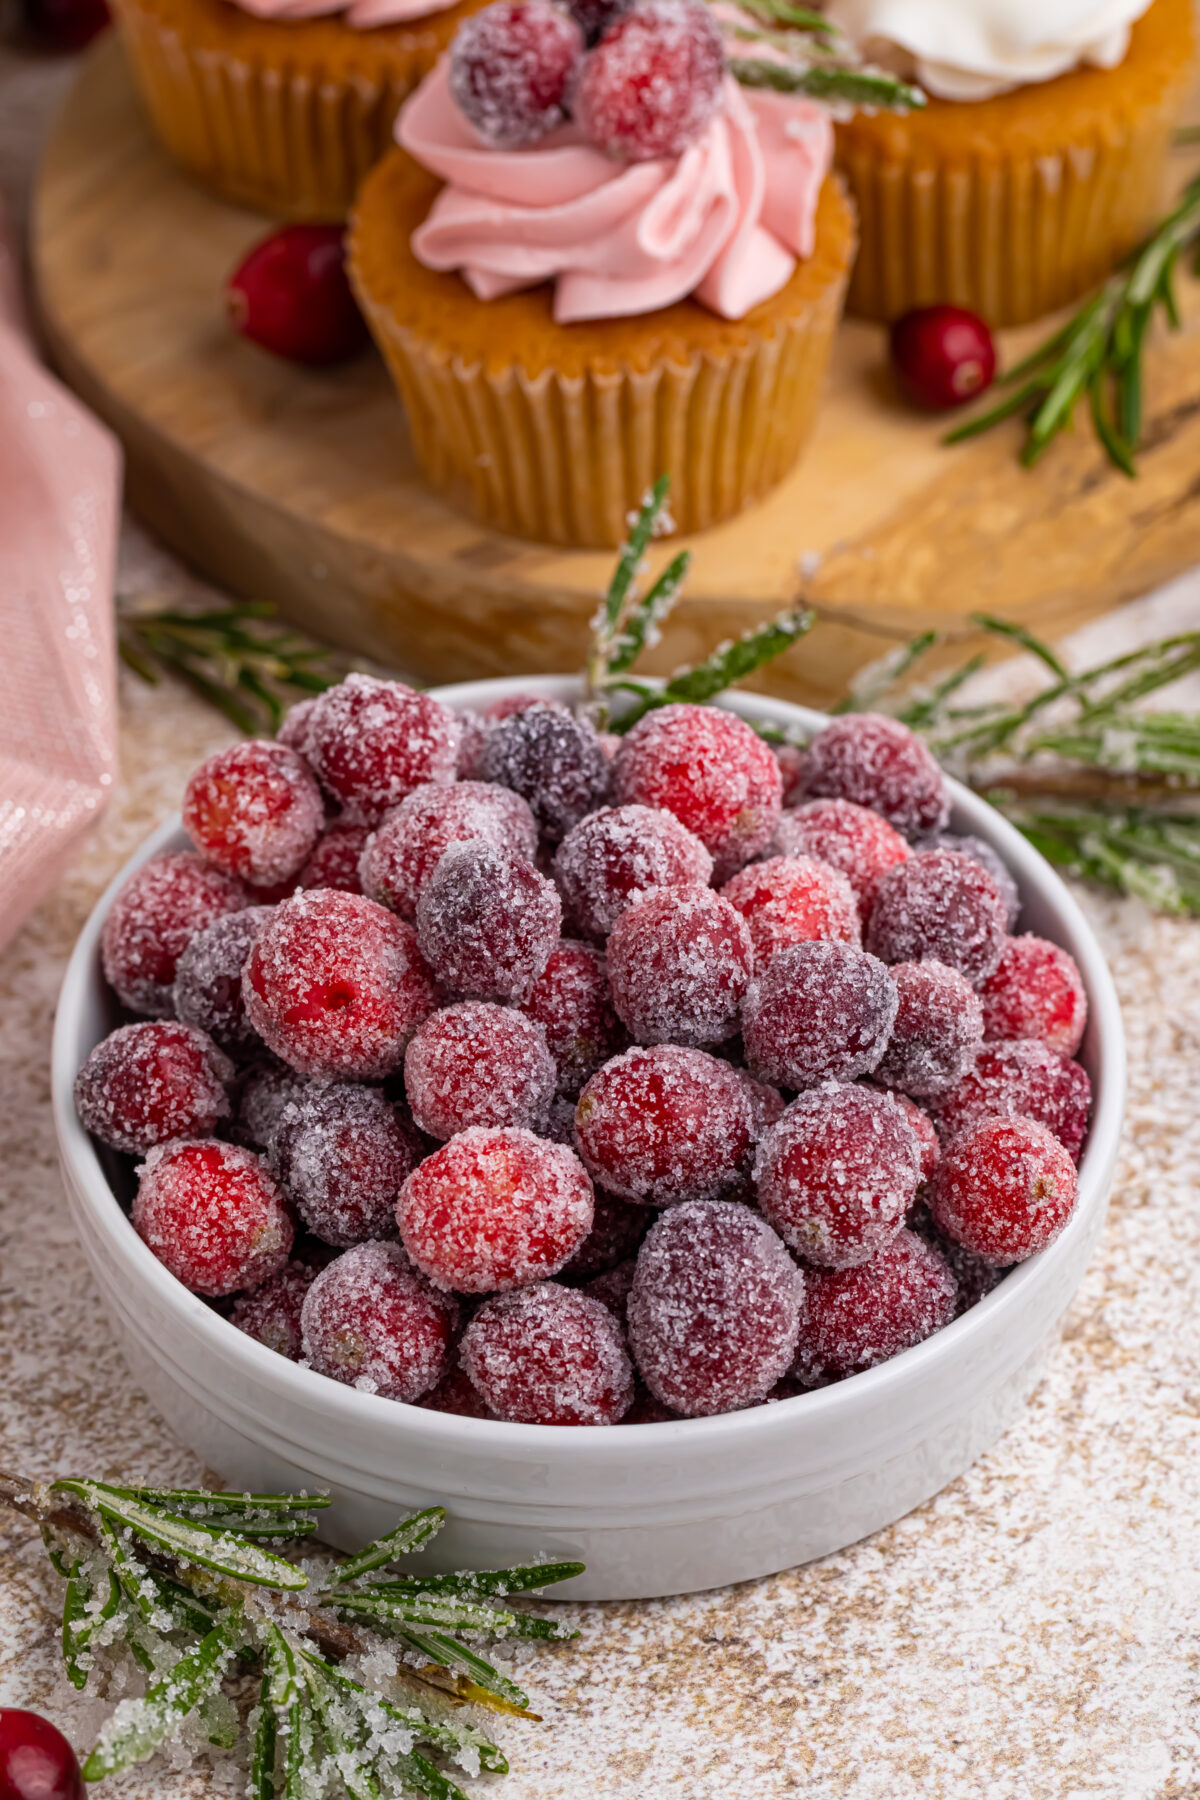 Make beautiful and delicious sugared cranberries from the comfort of your own kitchen. You'll be making festive dessert garnishes in no time.